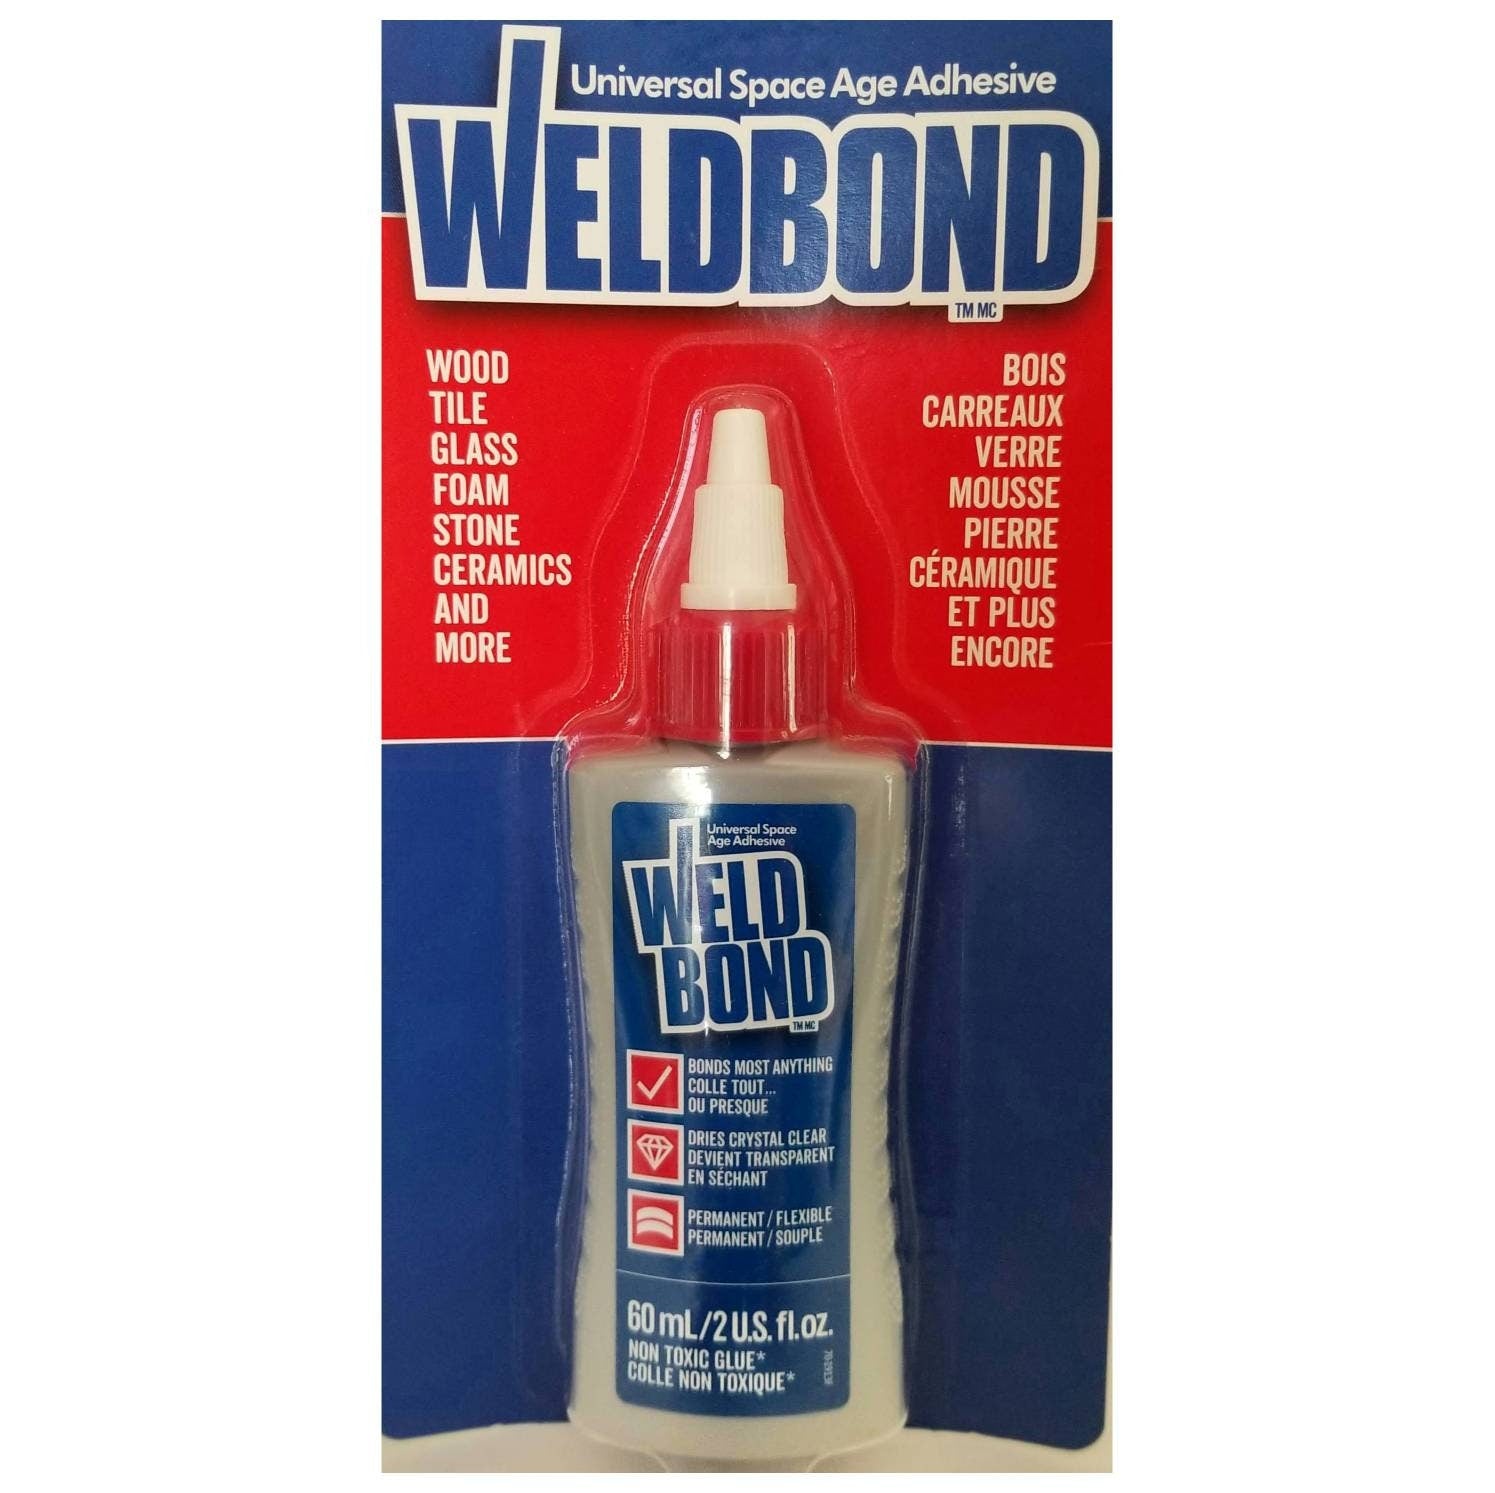 Clear Glue, Weldbond for Glass Mosaic, Art/Craft Glue/Adhesive for